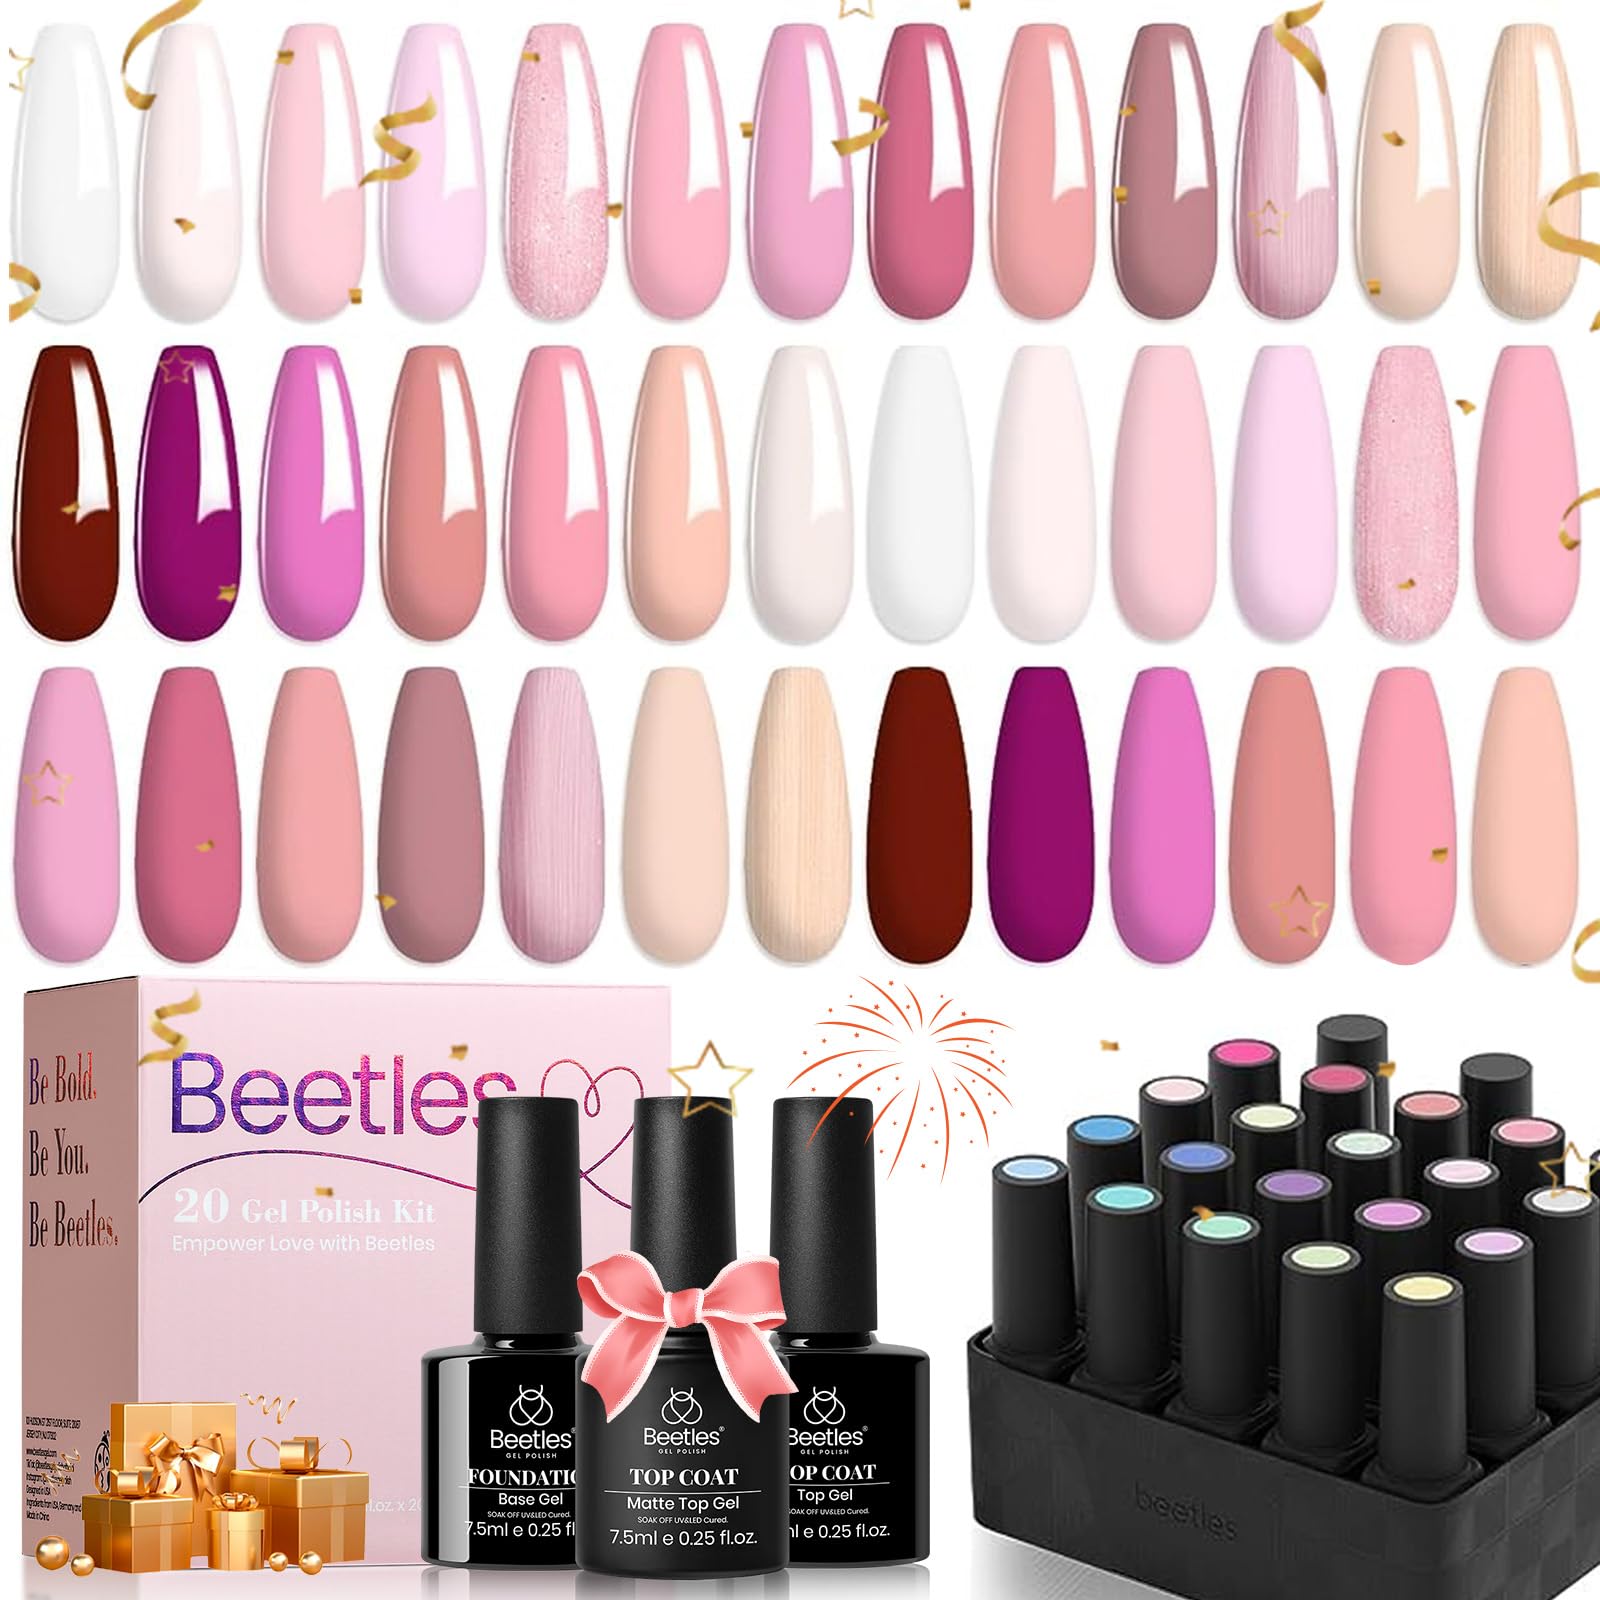 Dare to Bare - 20 Gel Colors Set with Top and Base Coat (5ml/Each)